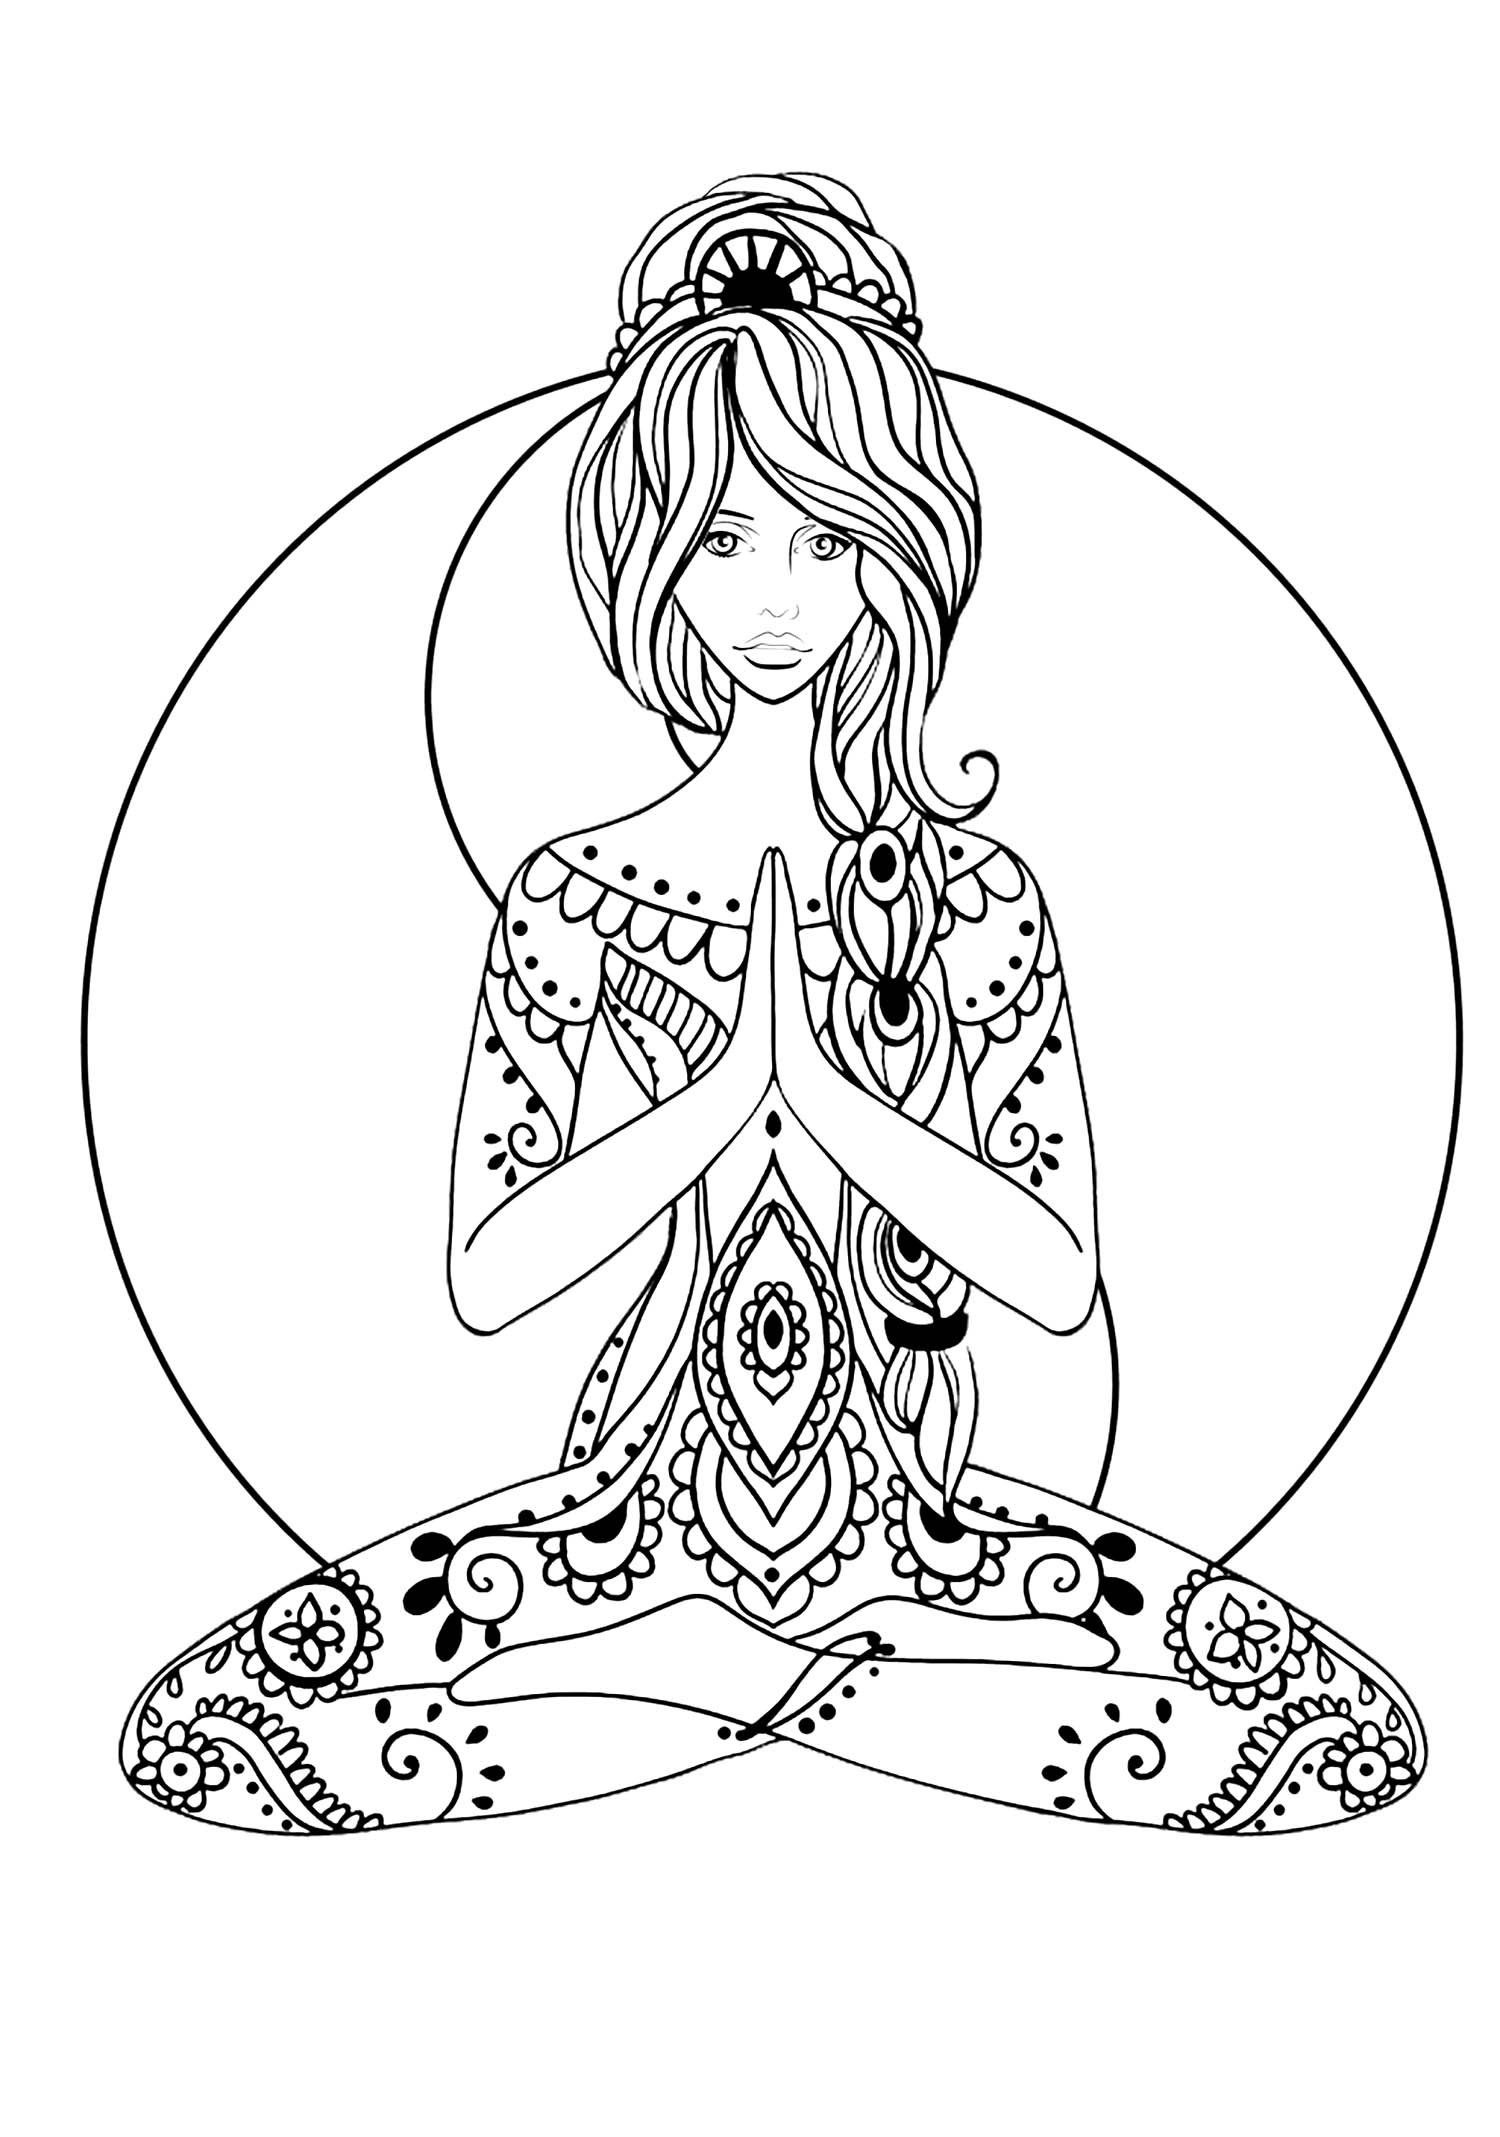 Yoga - Anti stress Adult Coloring Pages